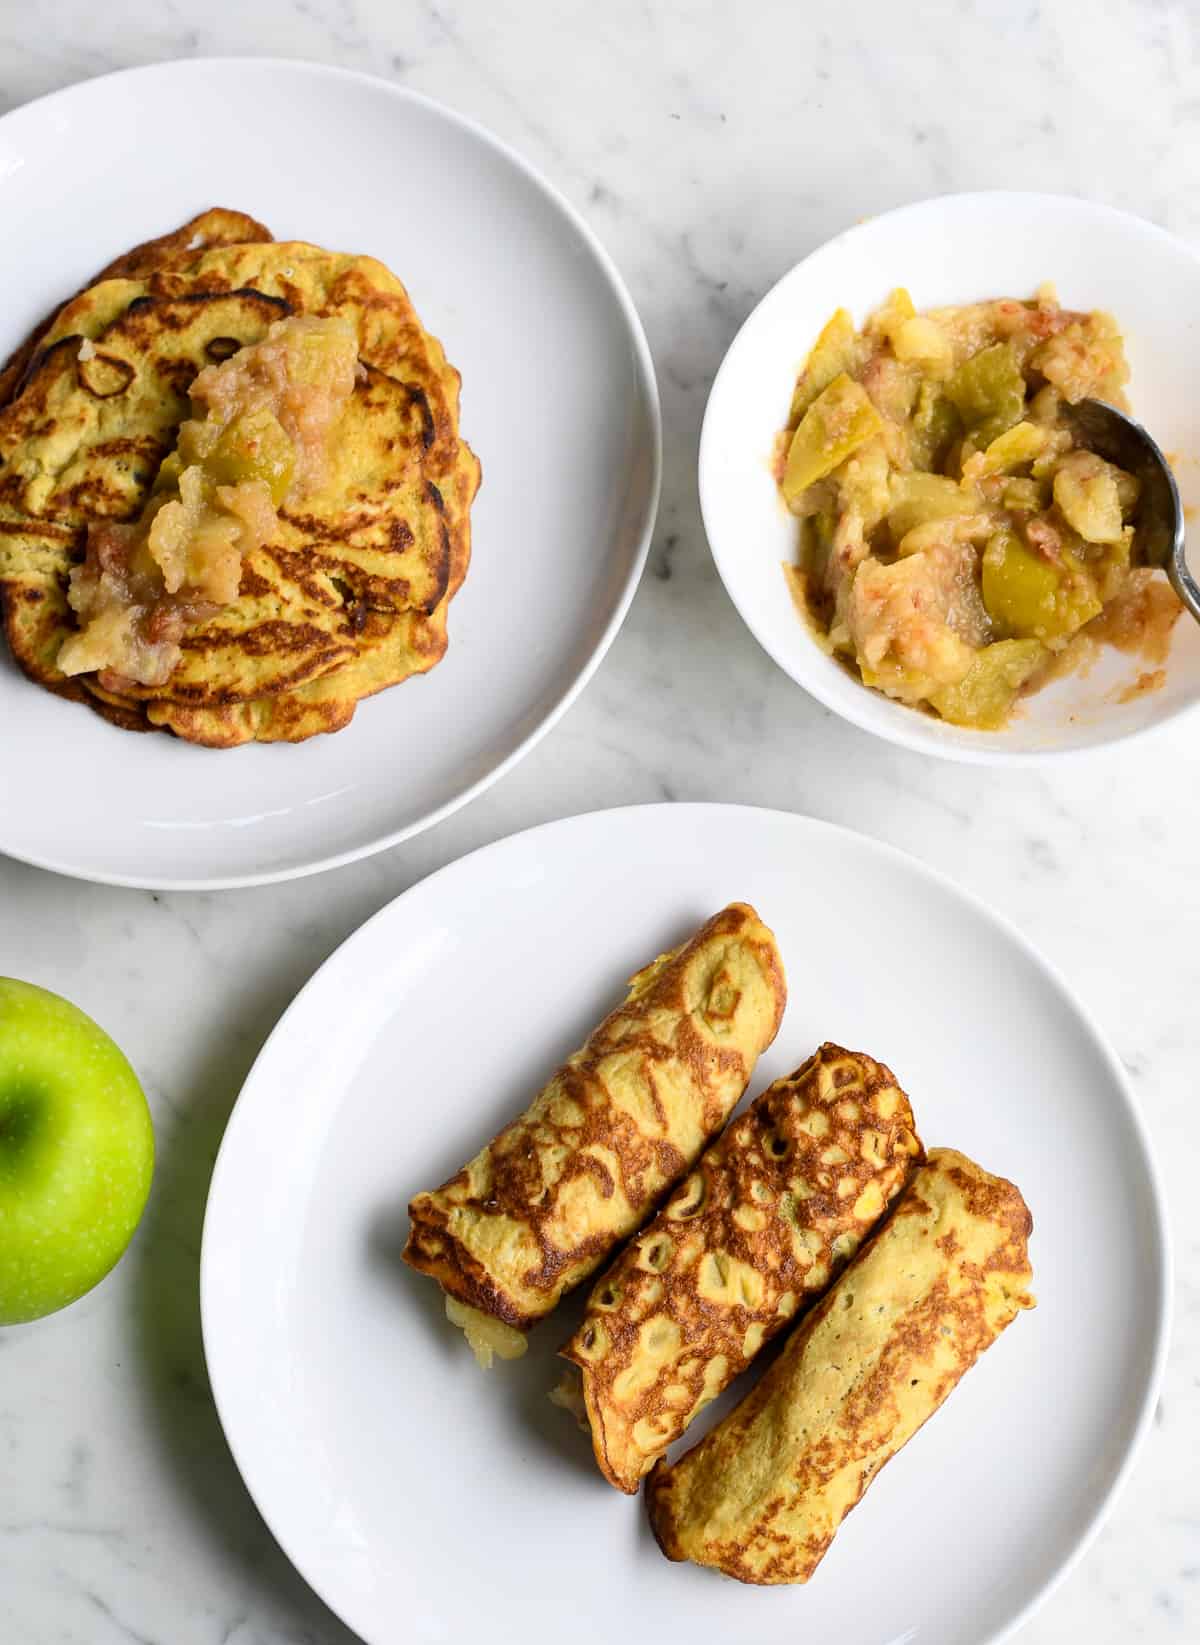 Grain free apple crepes with apple filling on side